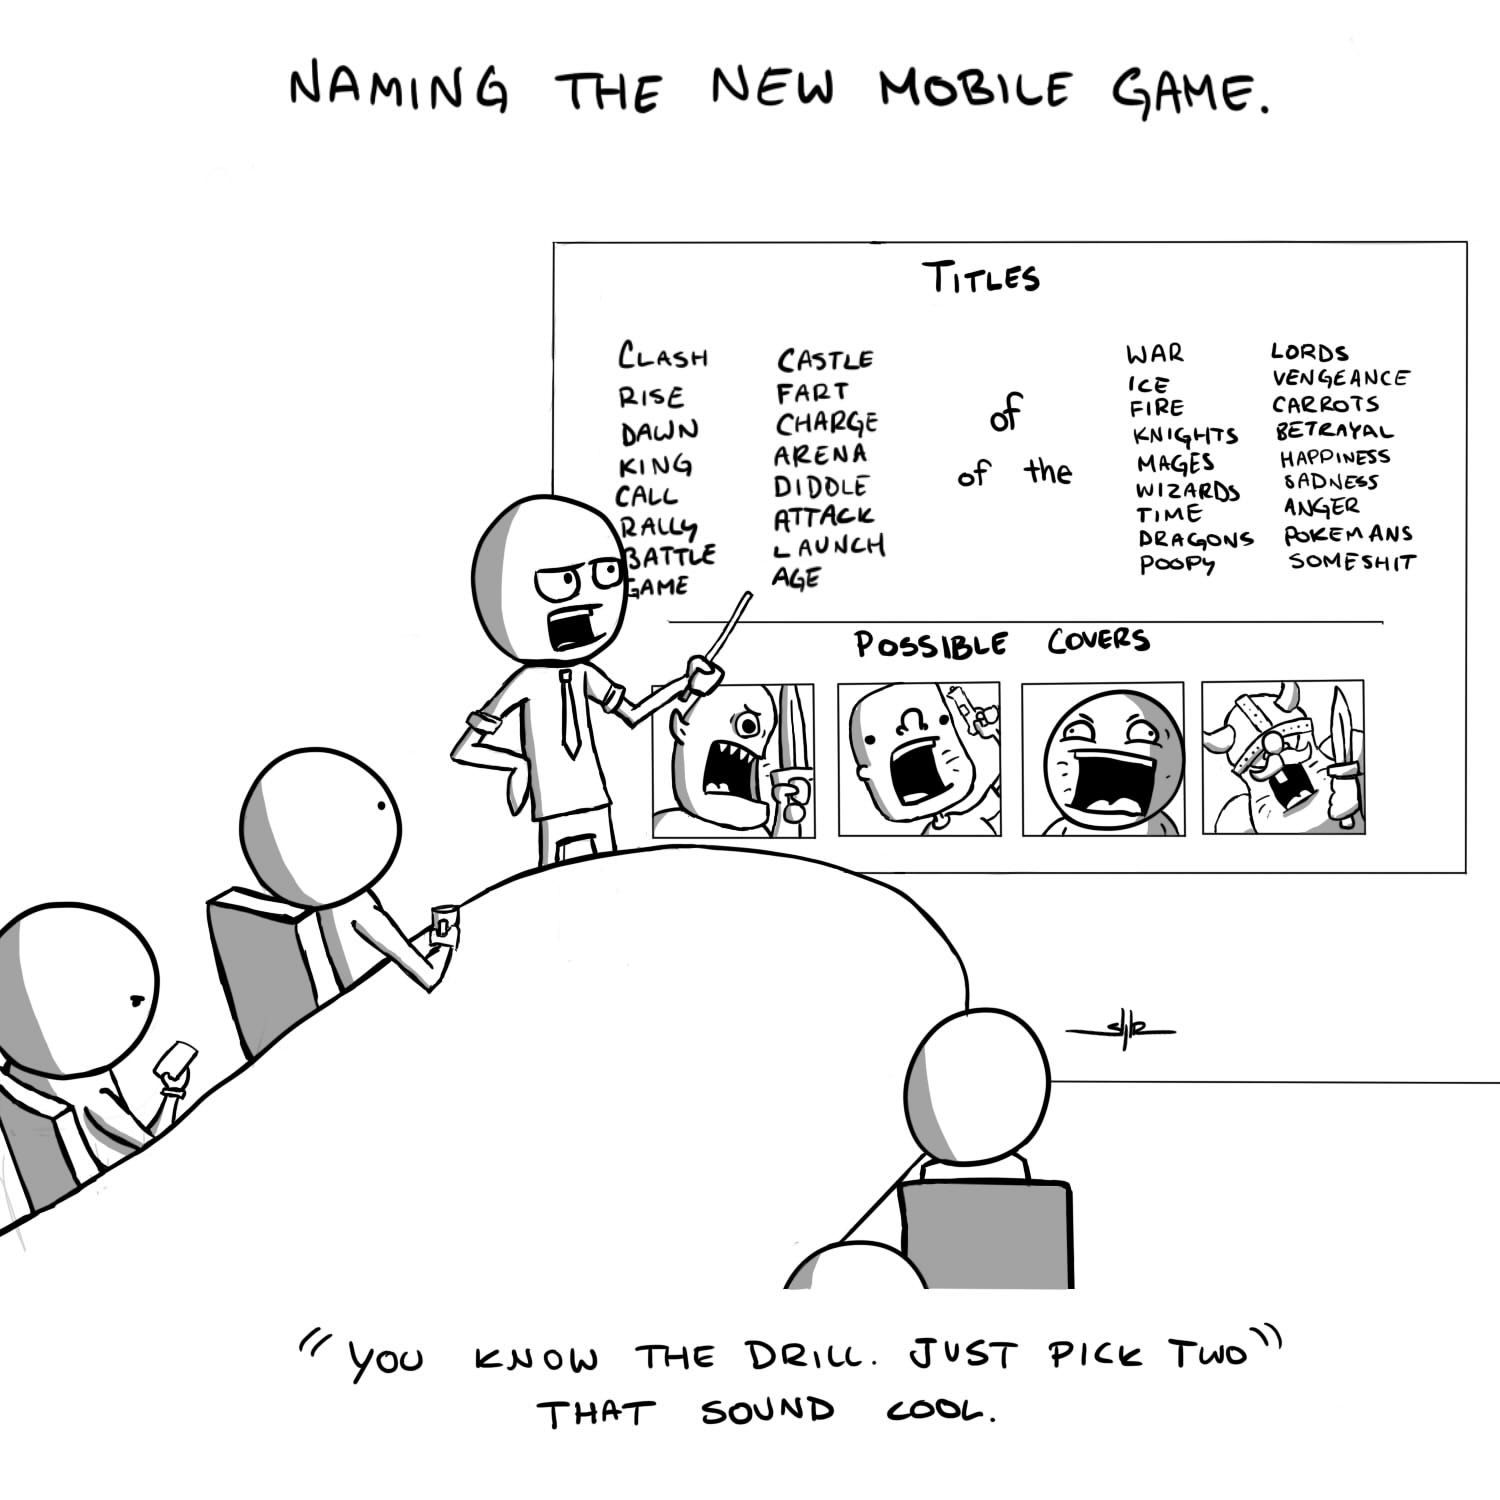 Naming the New Mobile Game